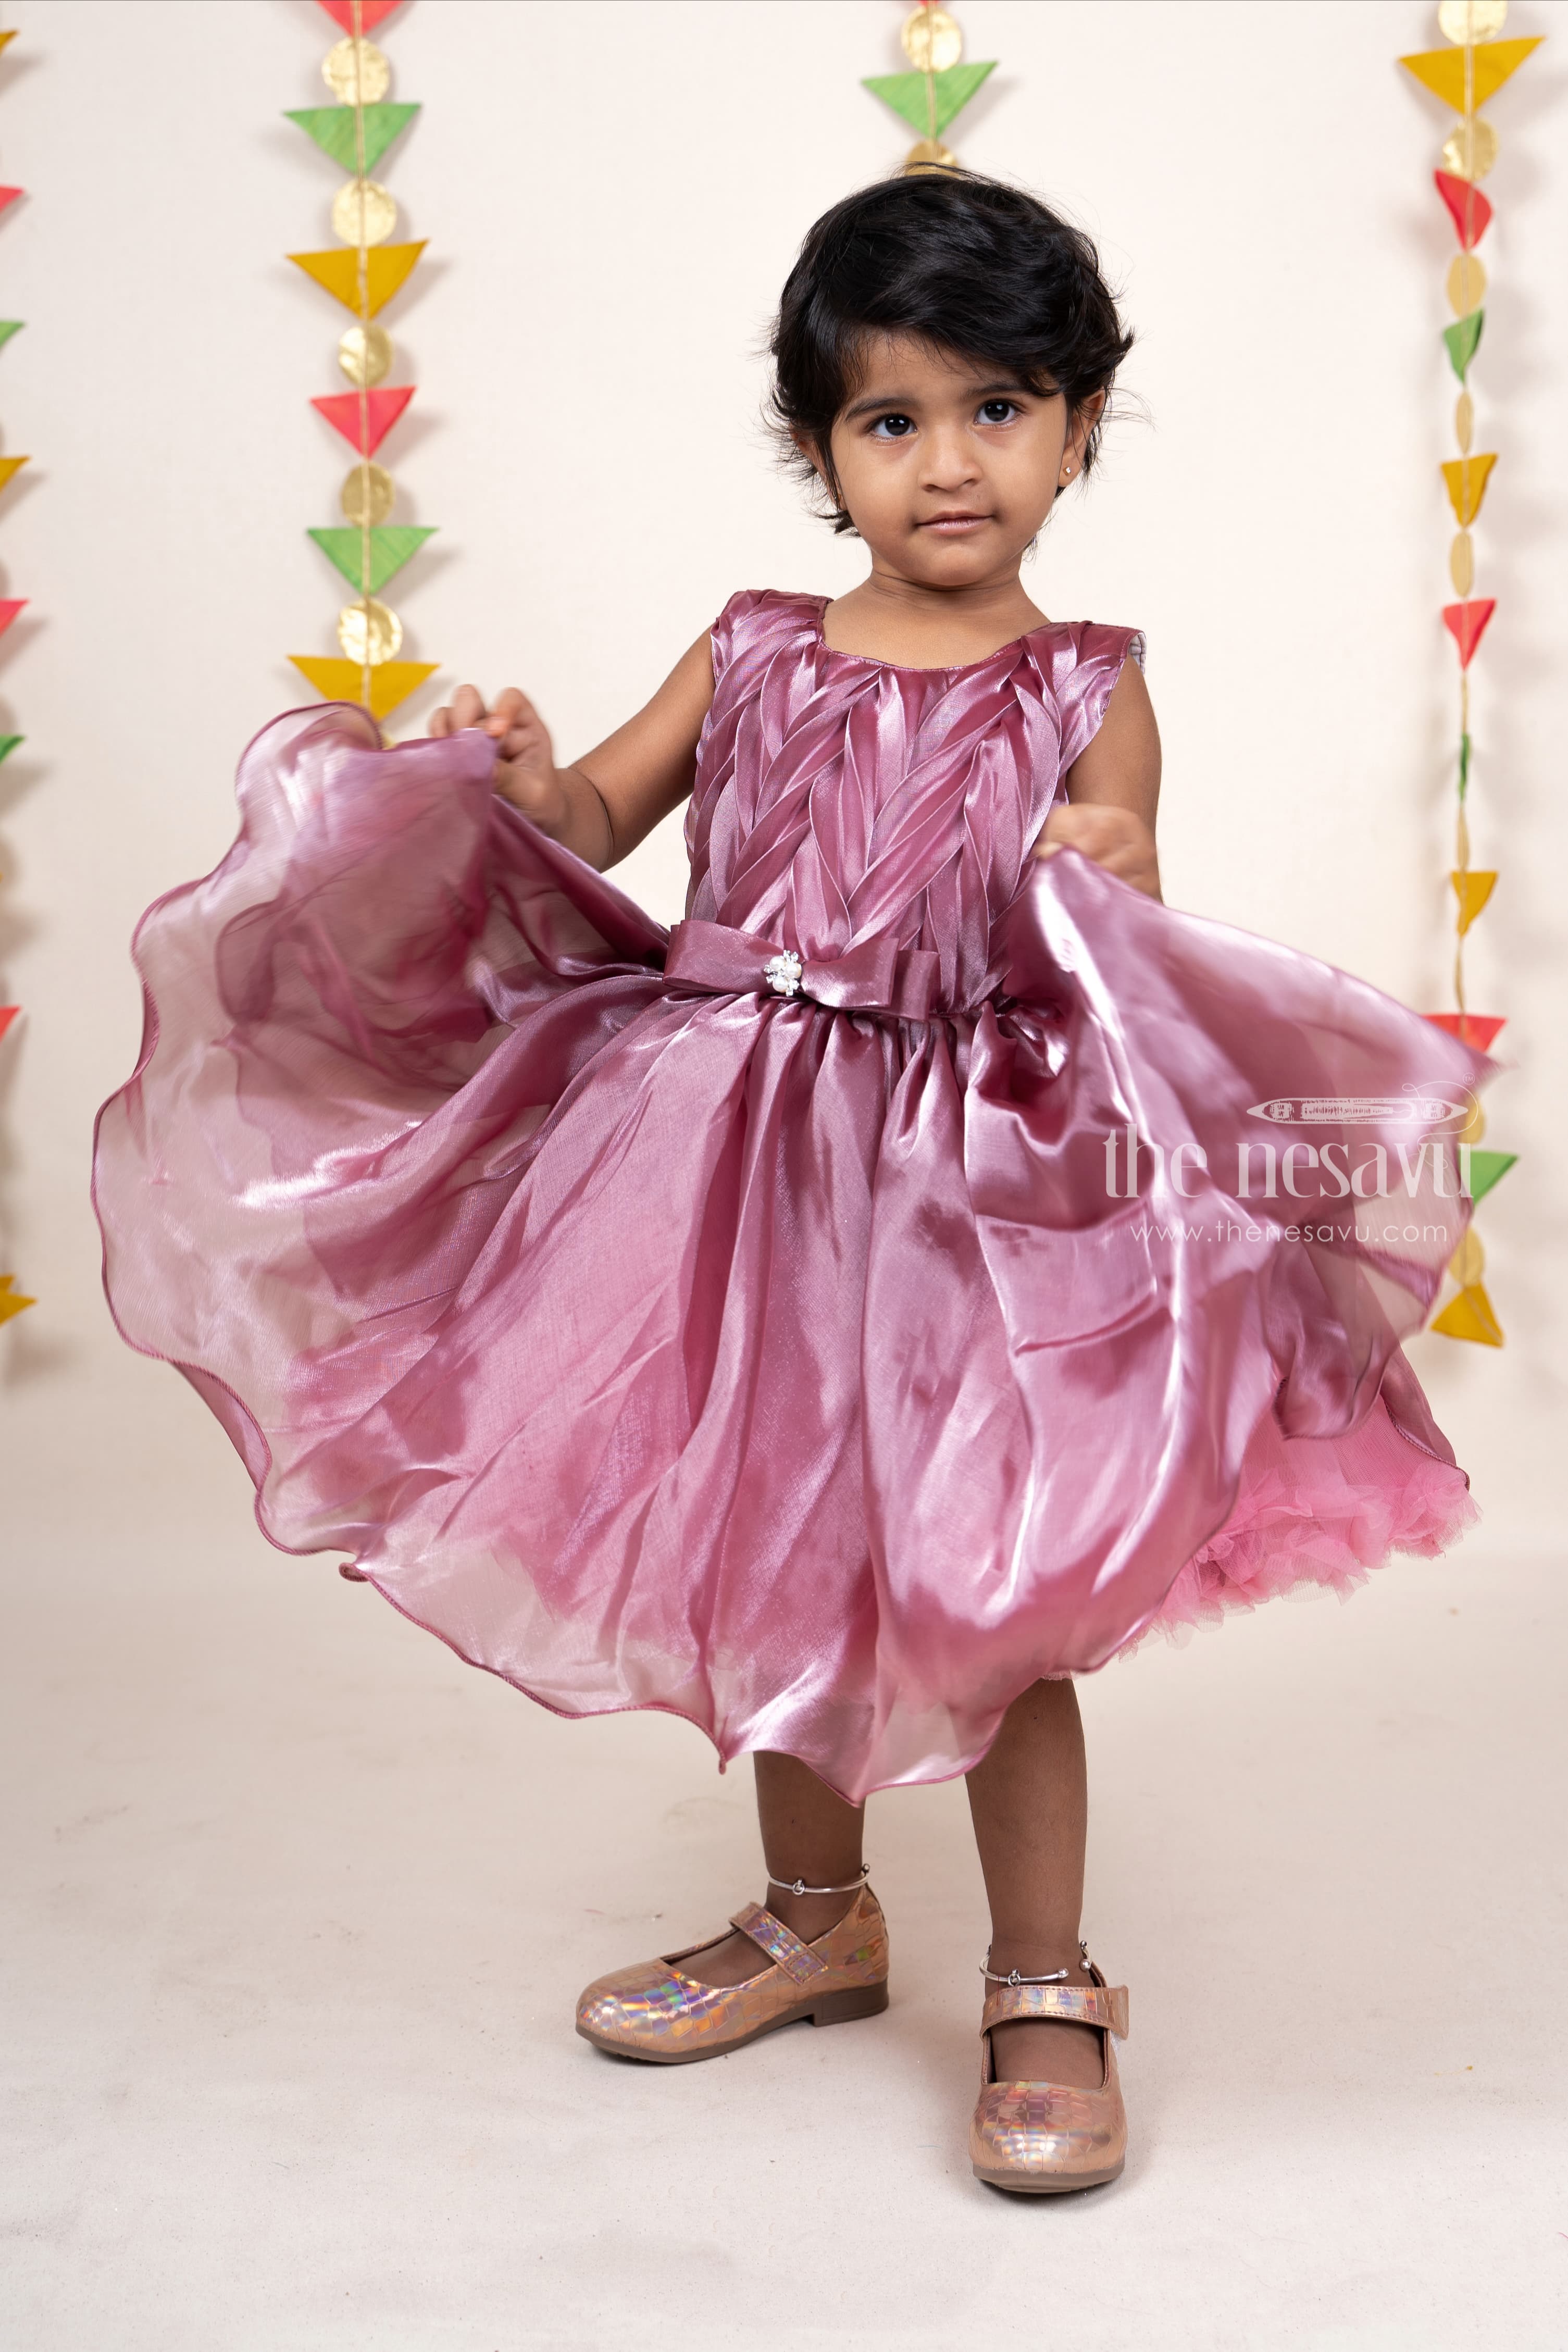 Eid special dress design 2022 for baby girls- eid dresses 2022 | Cute kids  photos, Baby dress diy, Baby clothes girl dresses